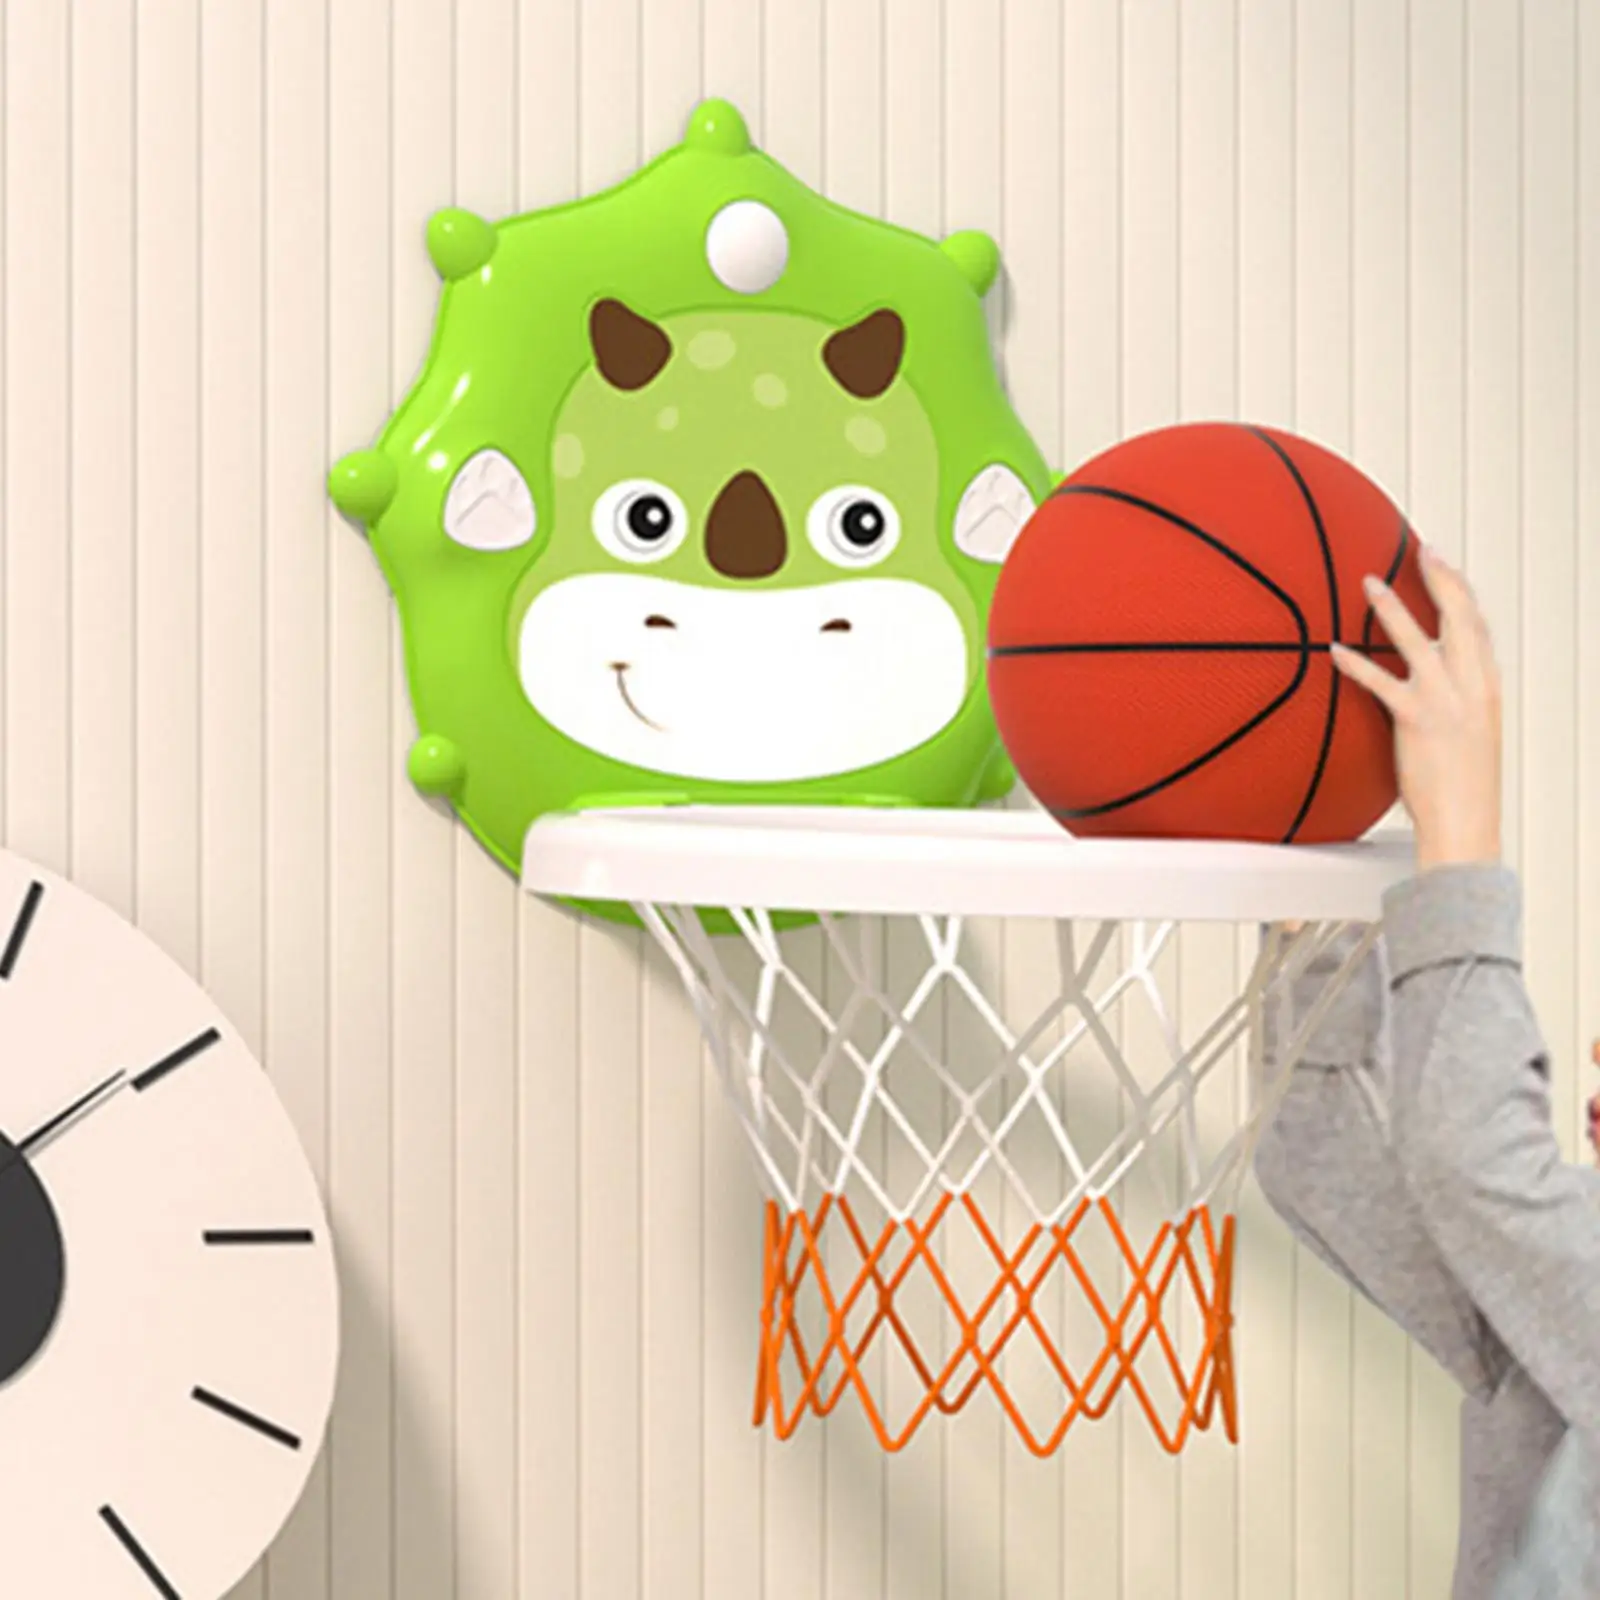 Basketball Toys Basketball Backboard Toy Early Educational Toys Mini Basketball Hoop for Wall Home Door Adults Gifts